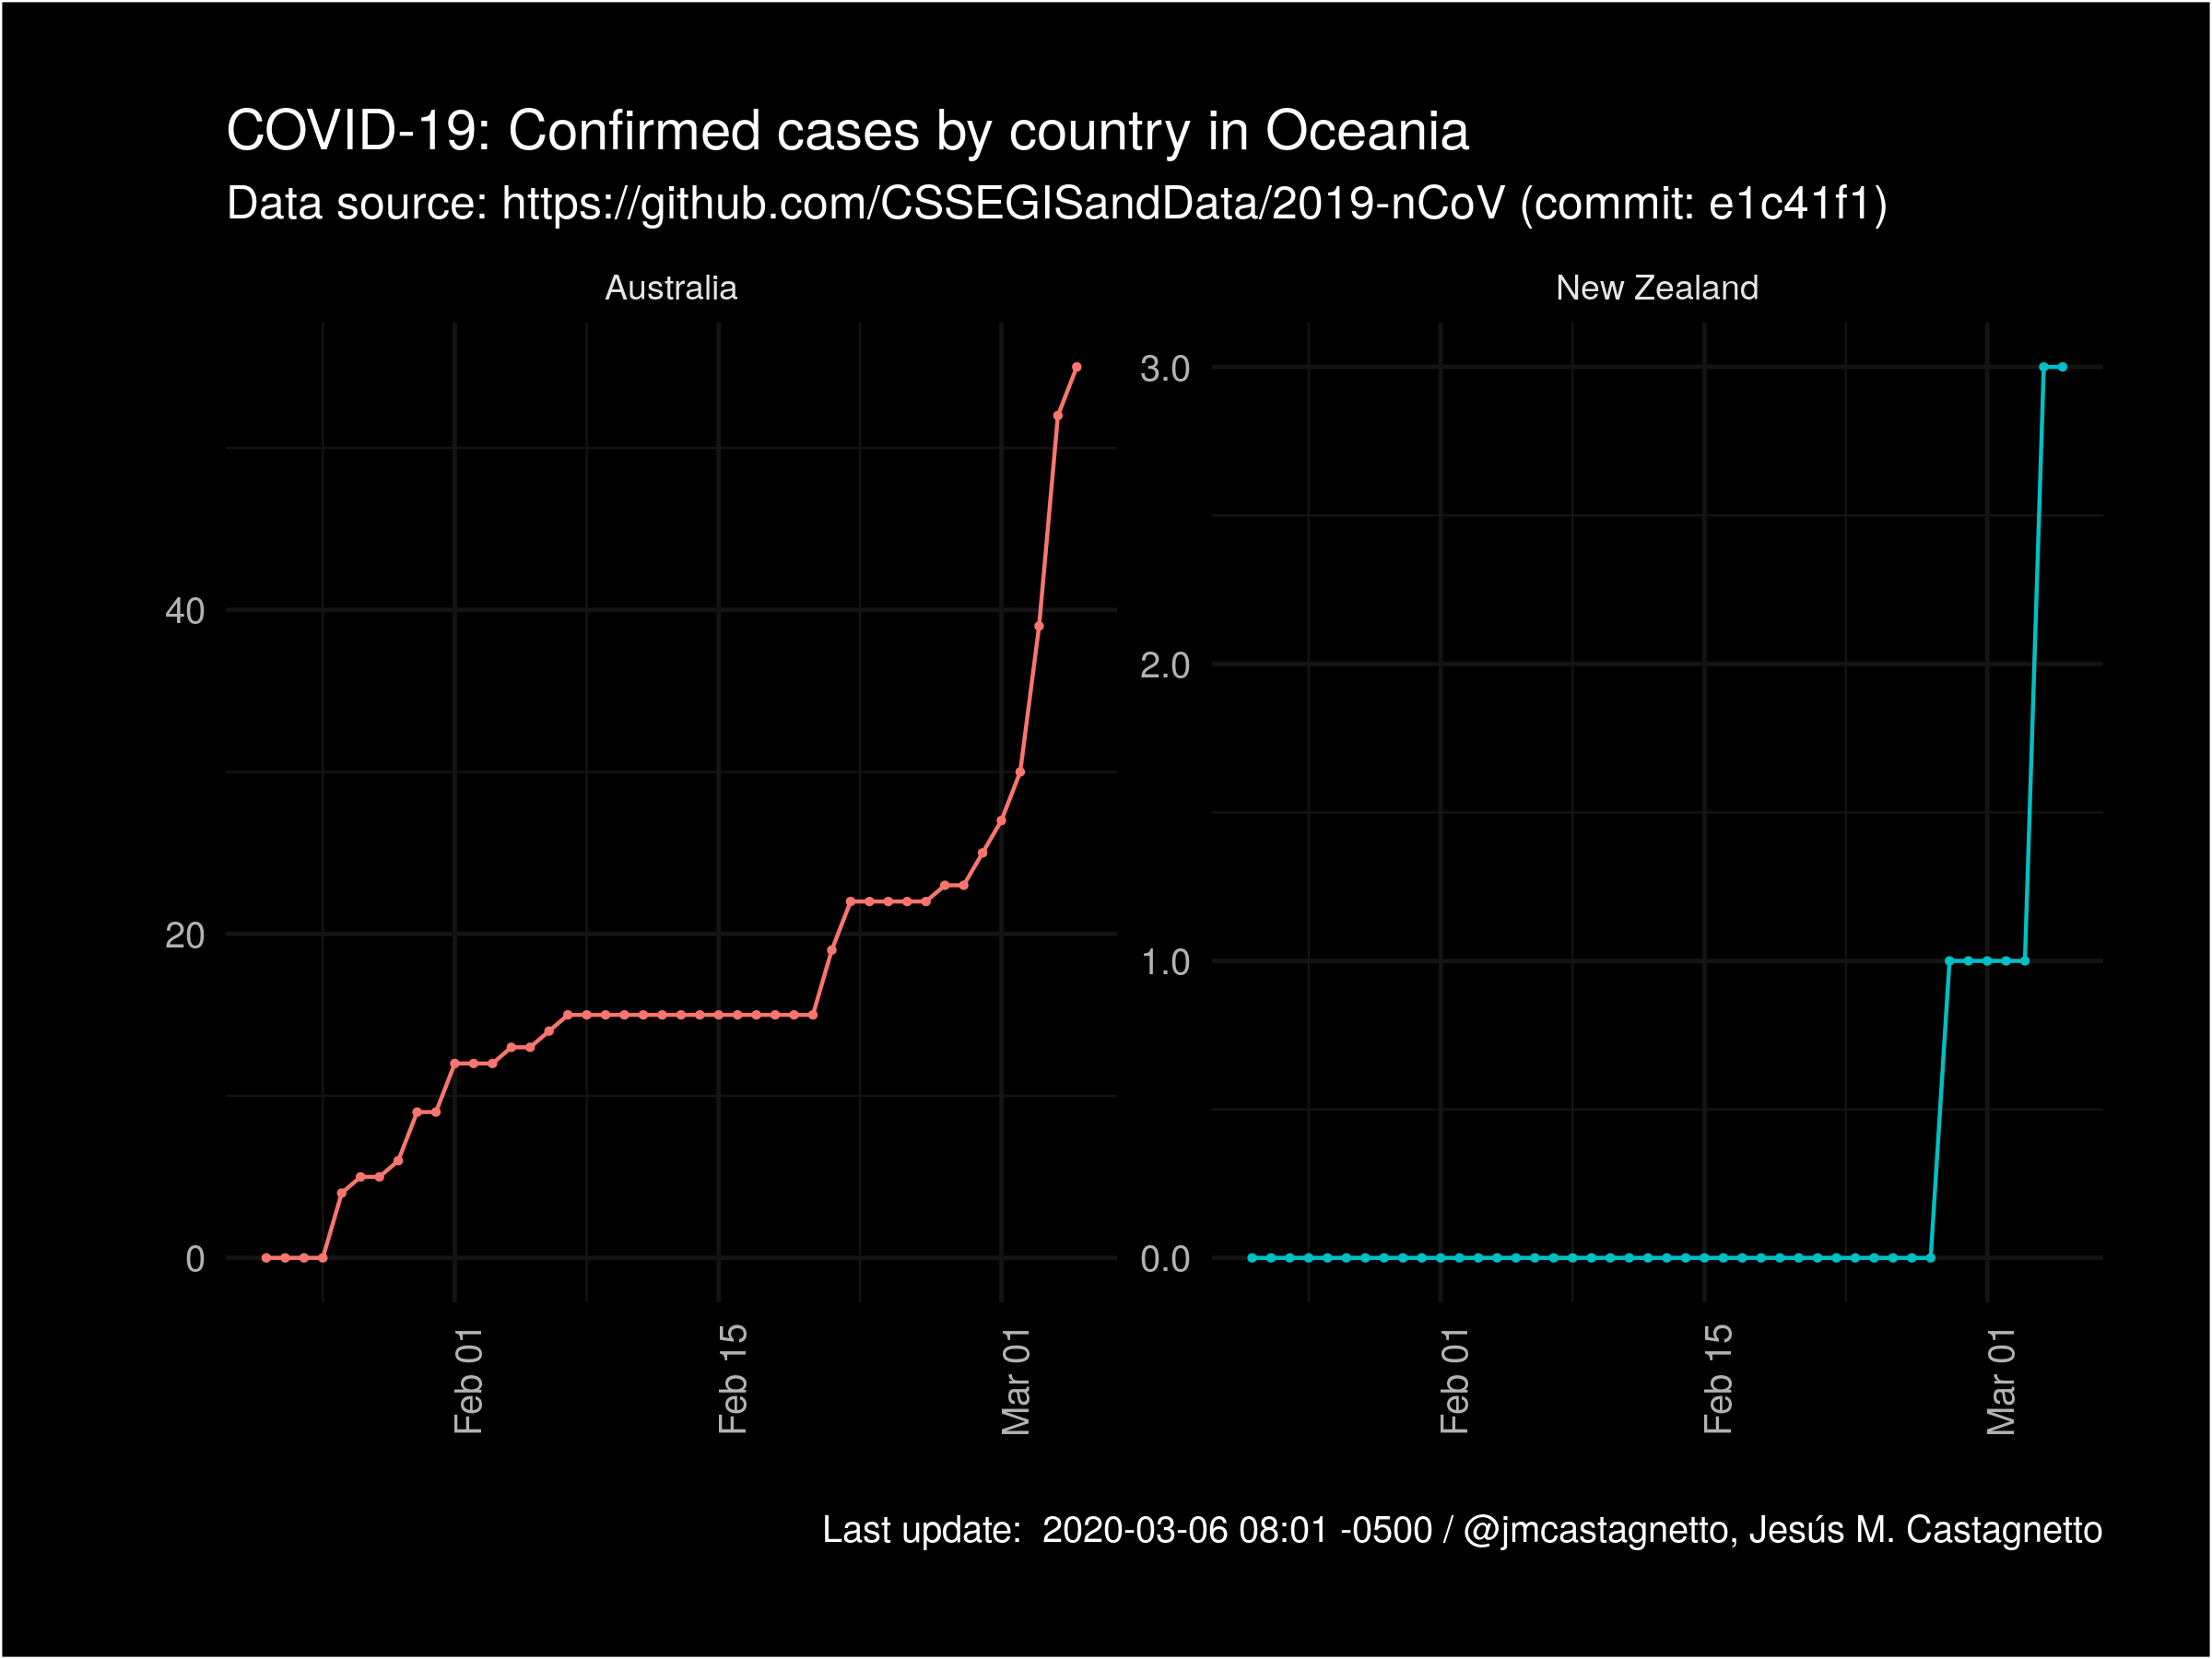 COVID-19 Confirmed cases by country (Oceania)